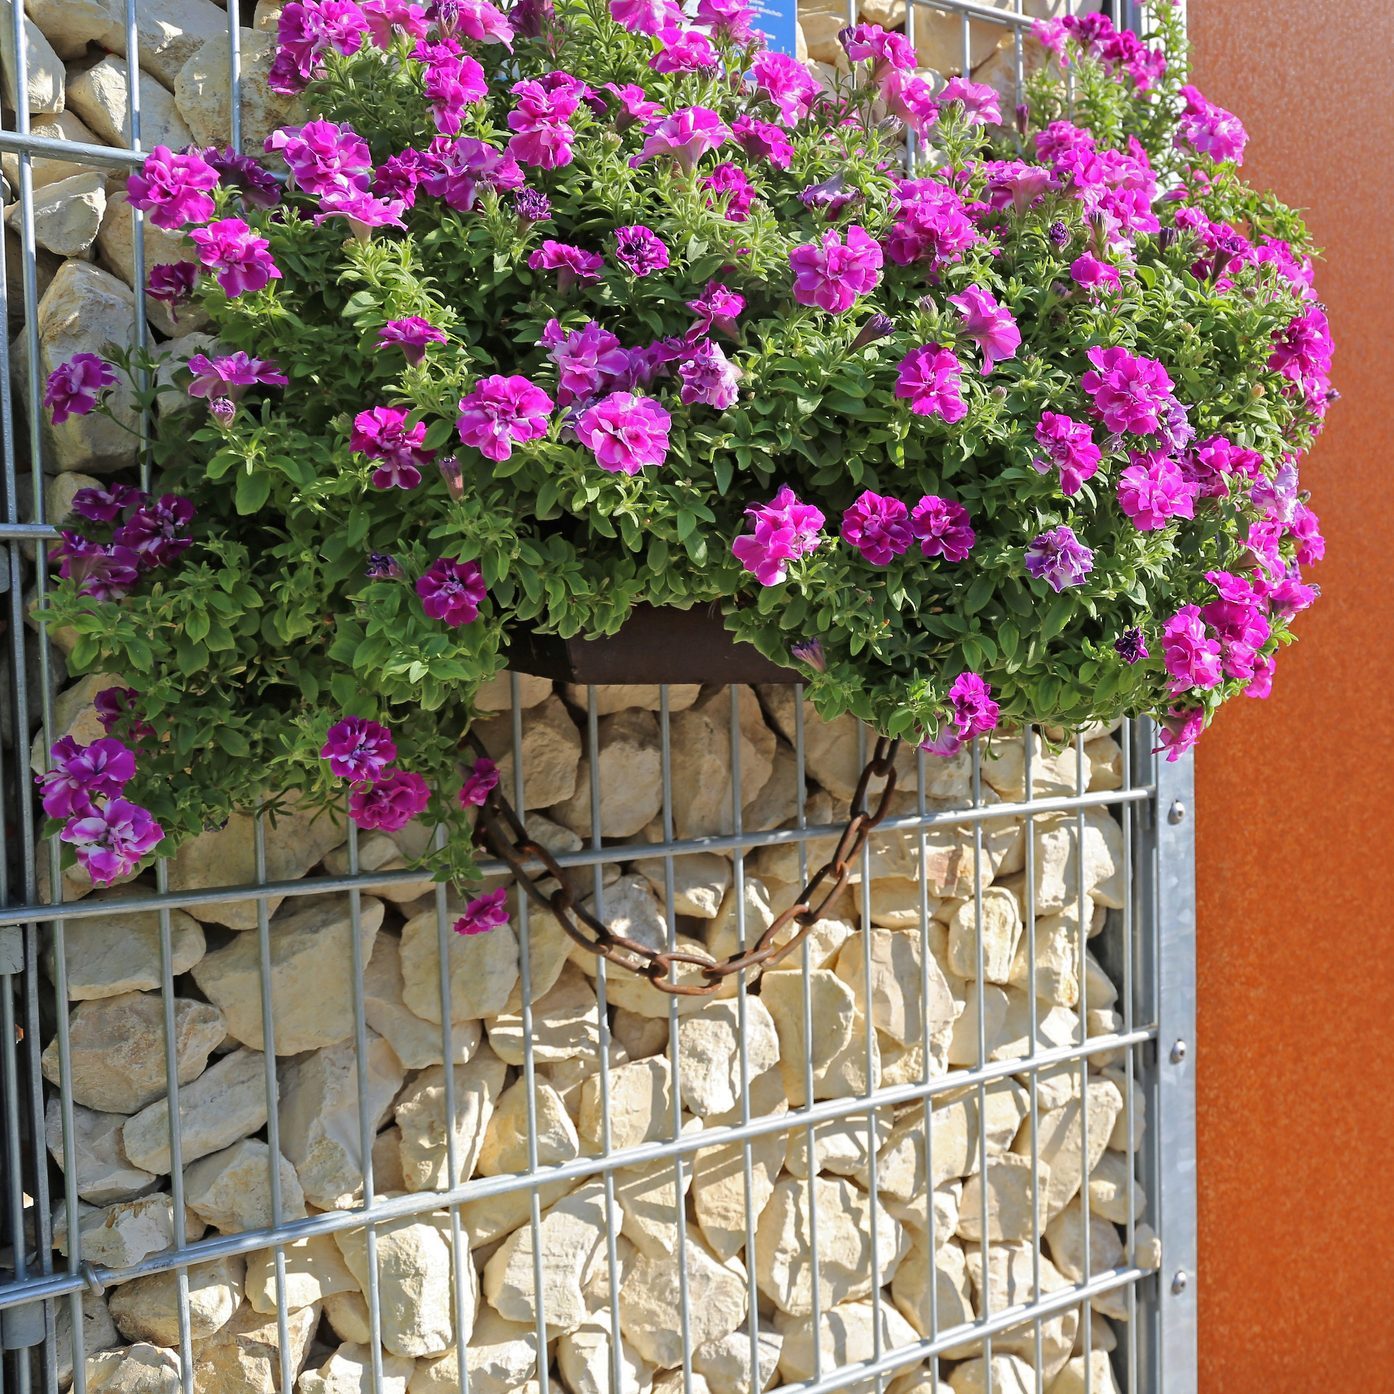 Gabion wall with hanging plants